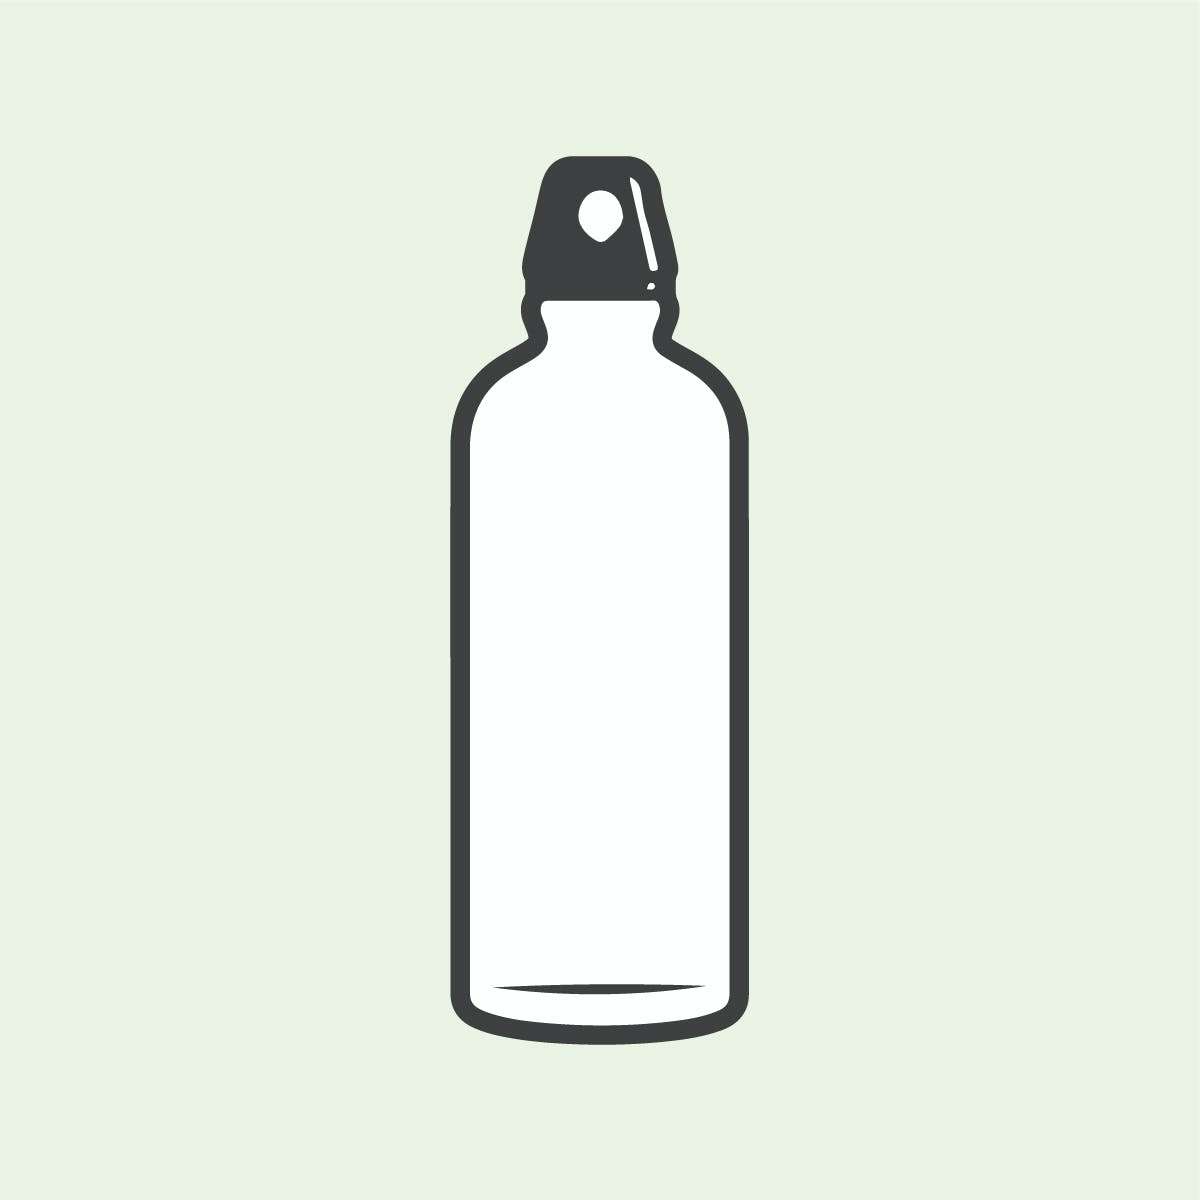 Icon of a stainless steel water bottle